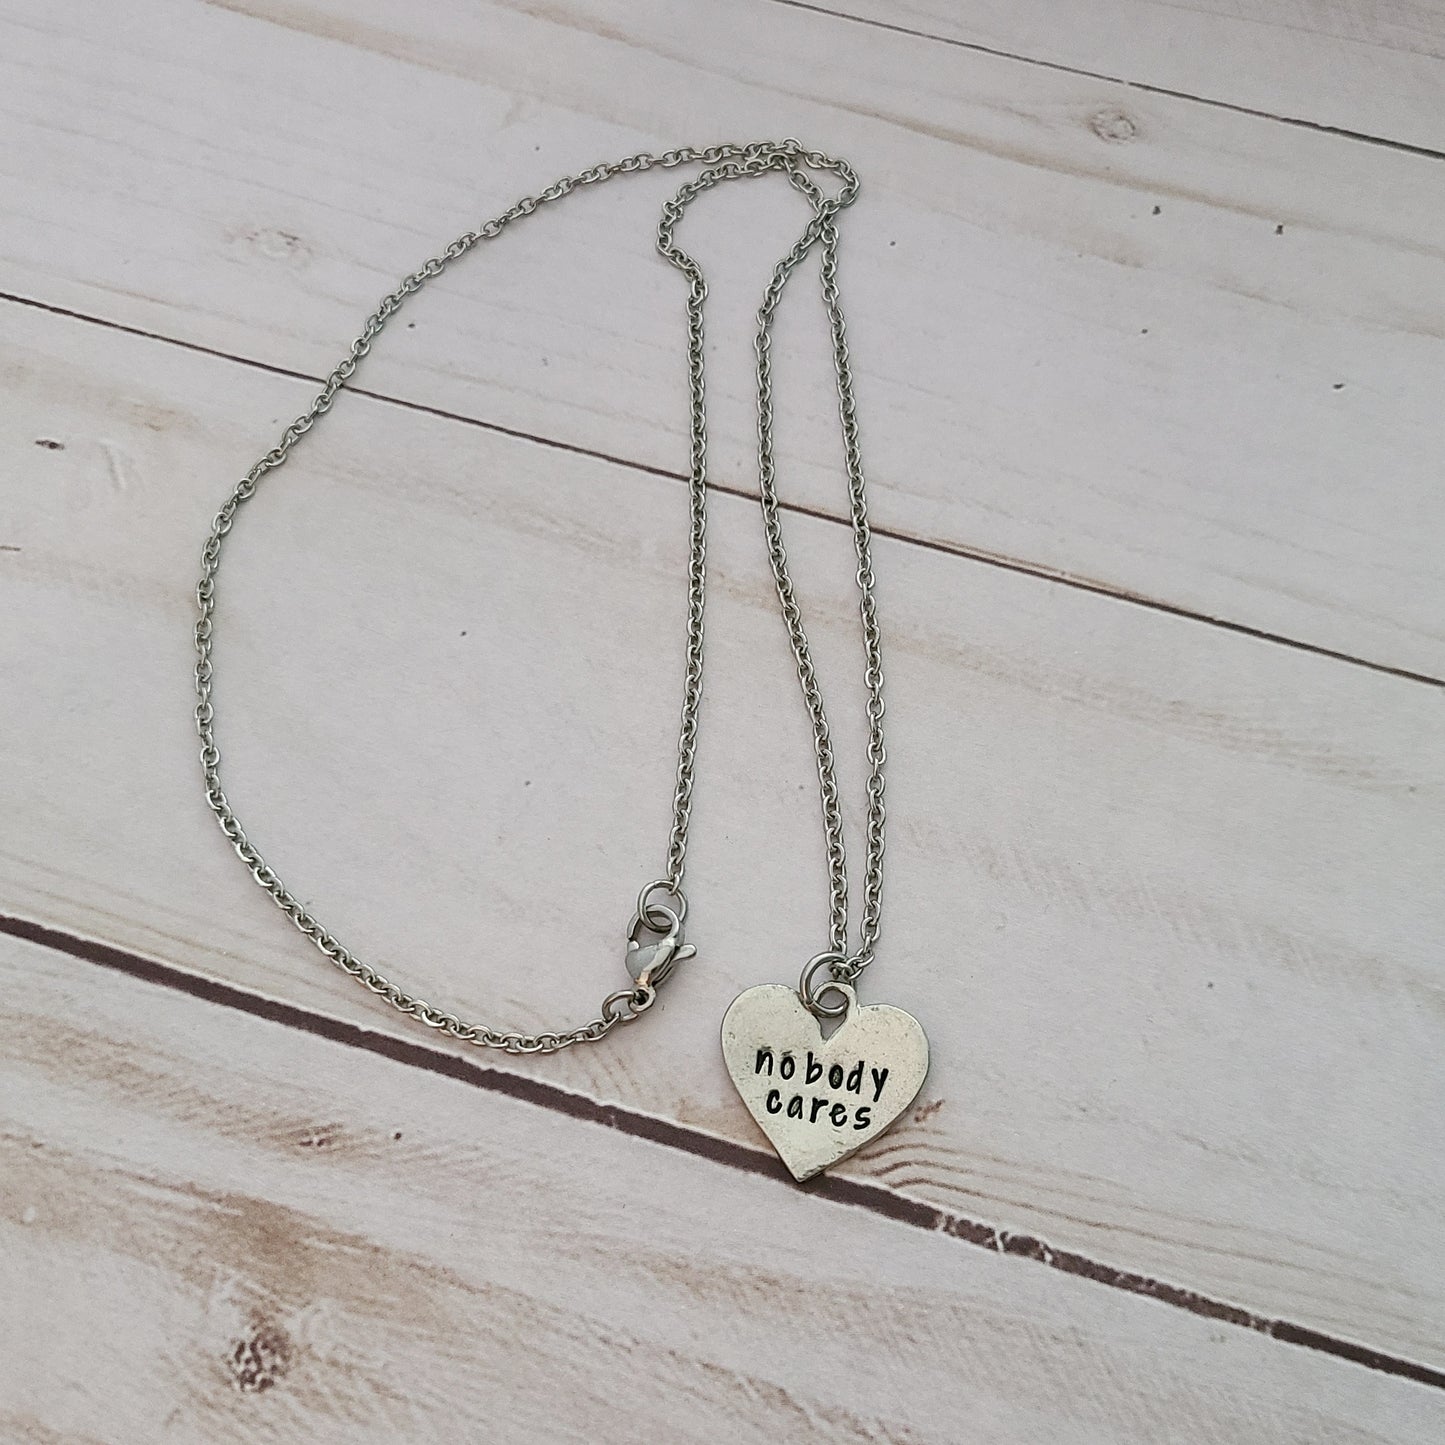 Nobody Cares - Heart Shaped Necklace